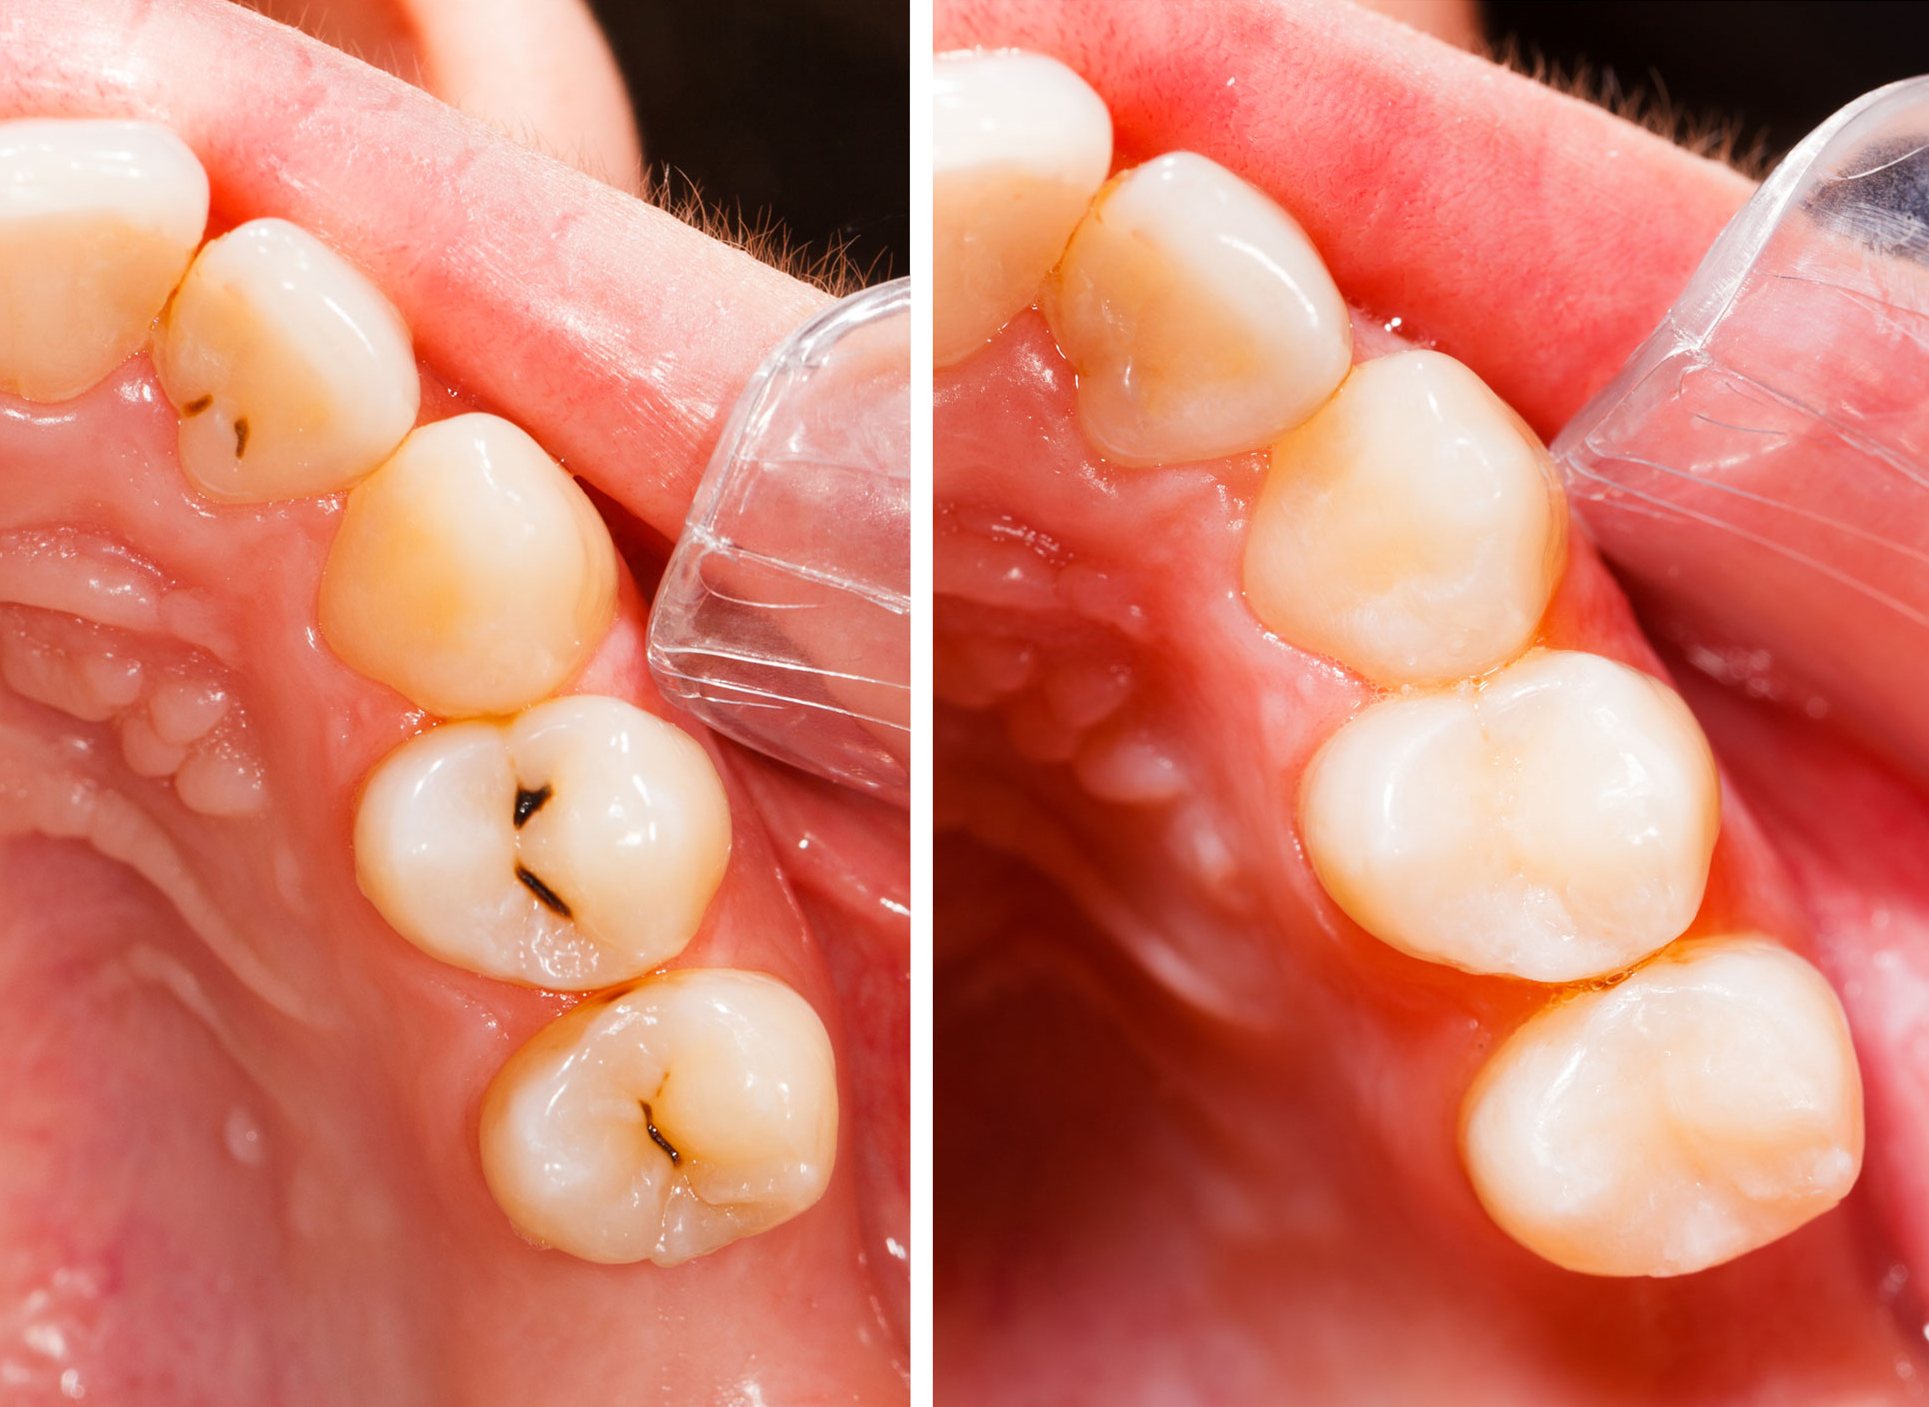 Before and after a treatment for filling.